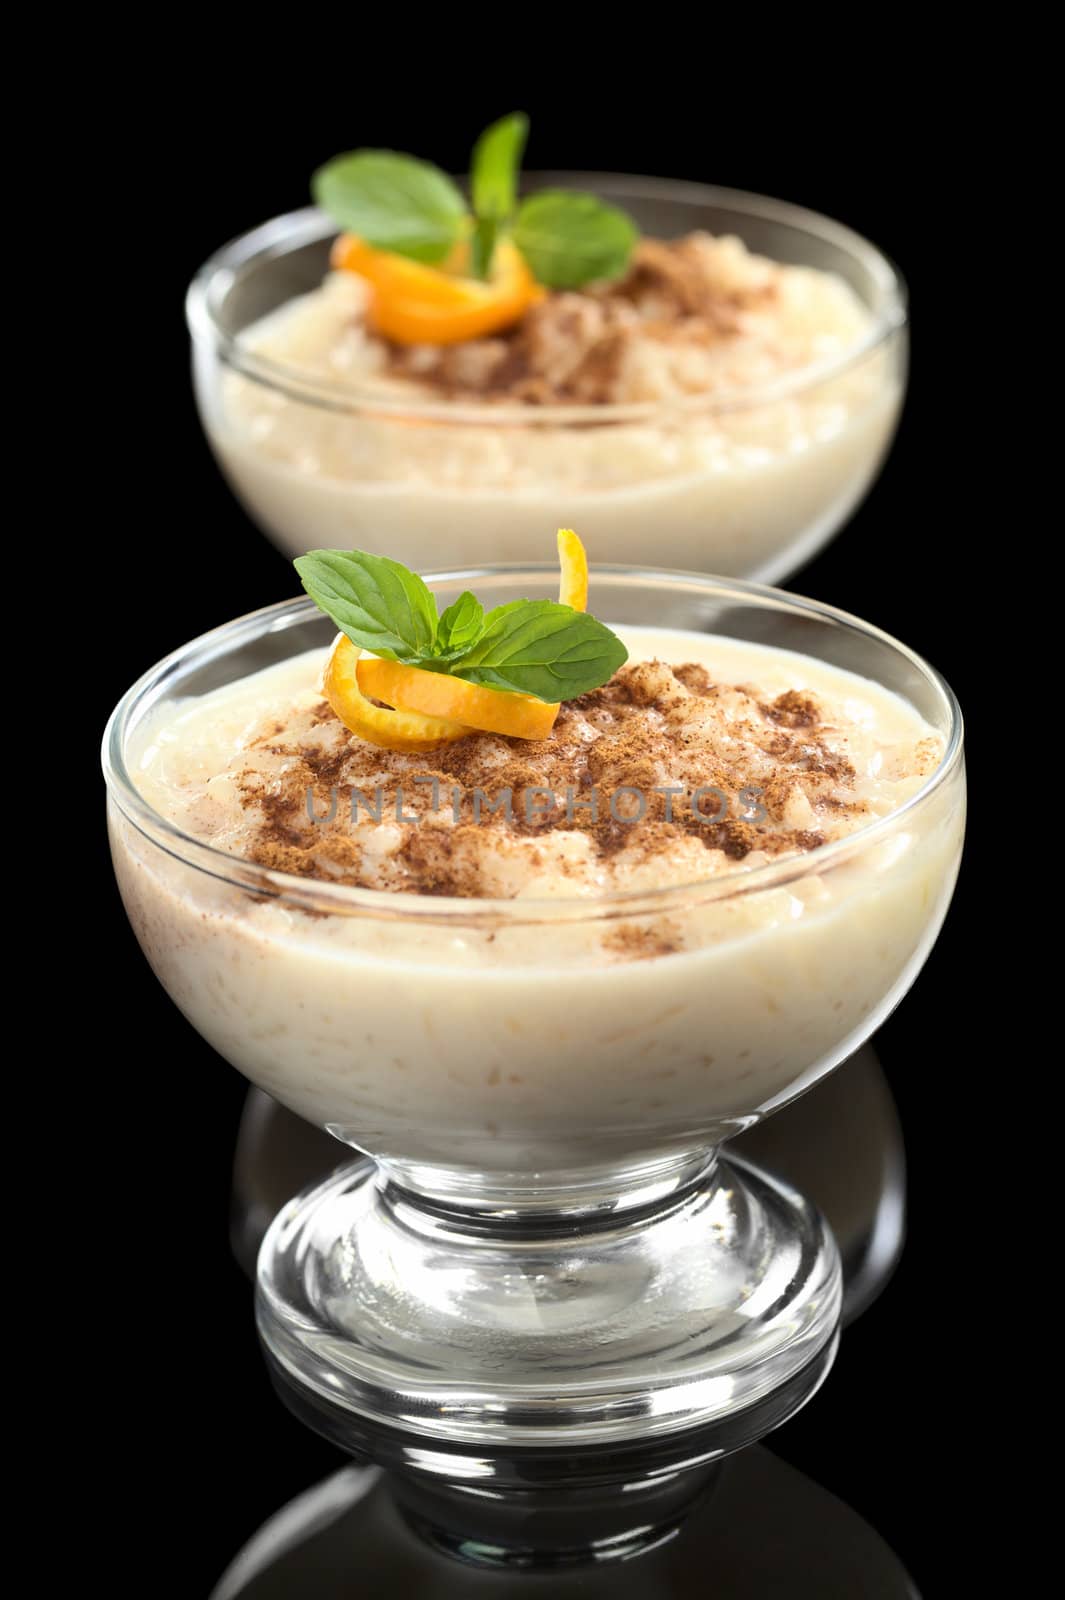 Delicious homemade rice pudding with cinnamon garnished with orange peel and mint leaf photographed on black (Selective Focus, Focus on the orange peel and the mint leaf on the first dessert)